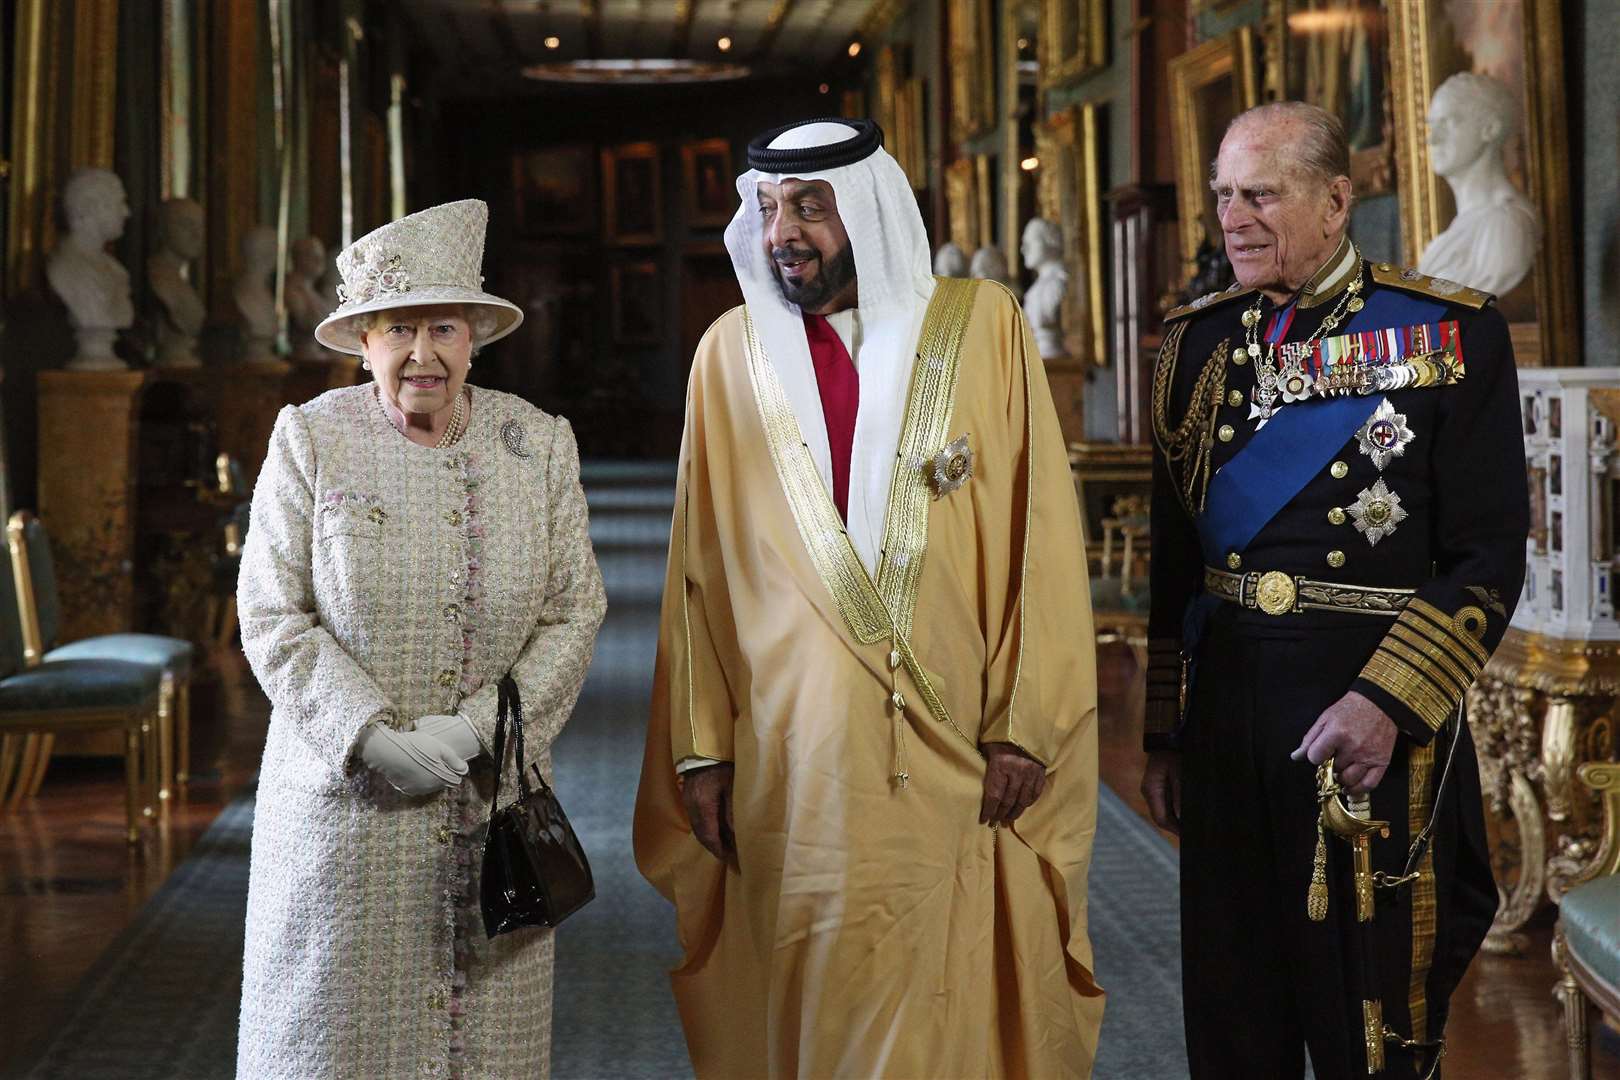 The Queen and the Duke of Edinburgh with Sheikh Khalifa bin Zayed Al Nahyan during his state visit in 2013 (Oli Scarff/PA)